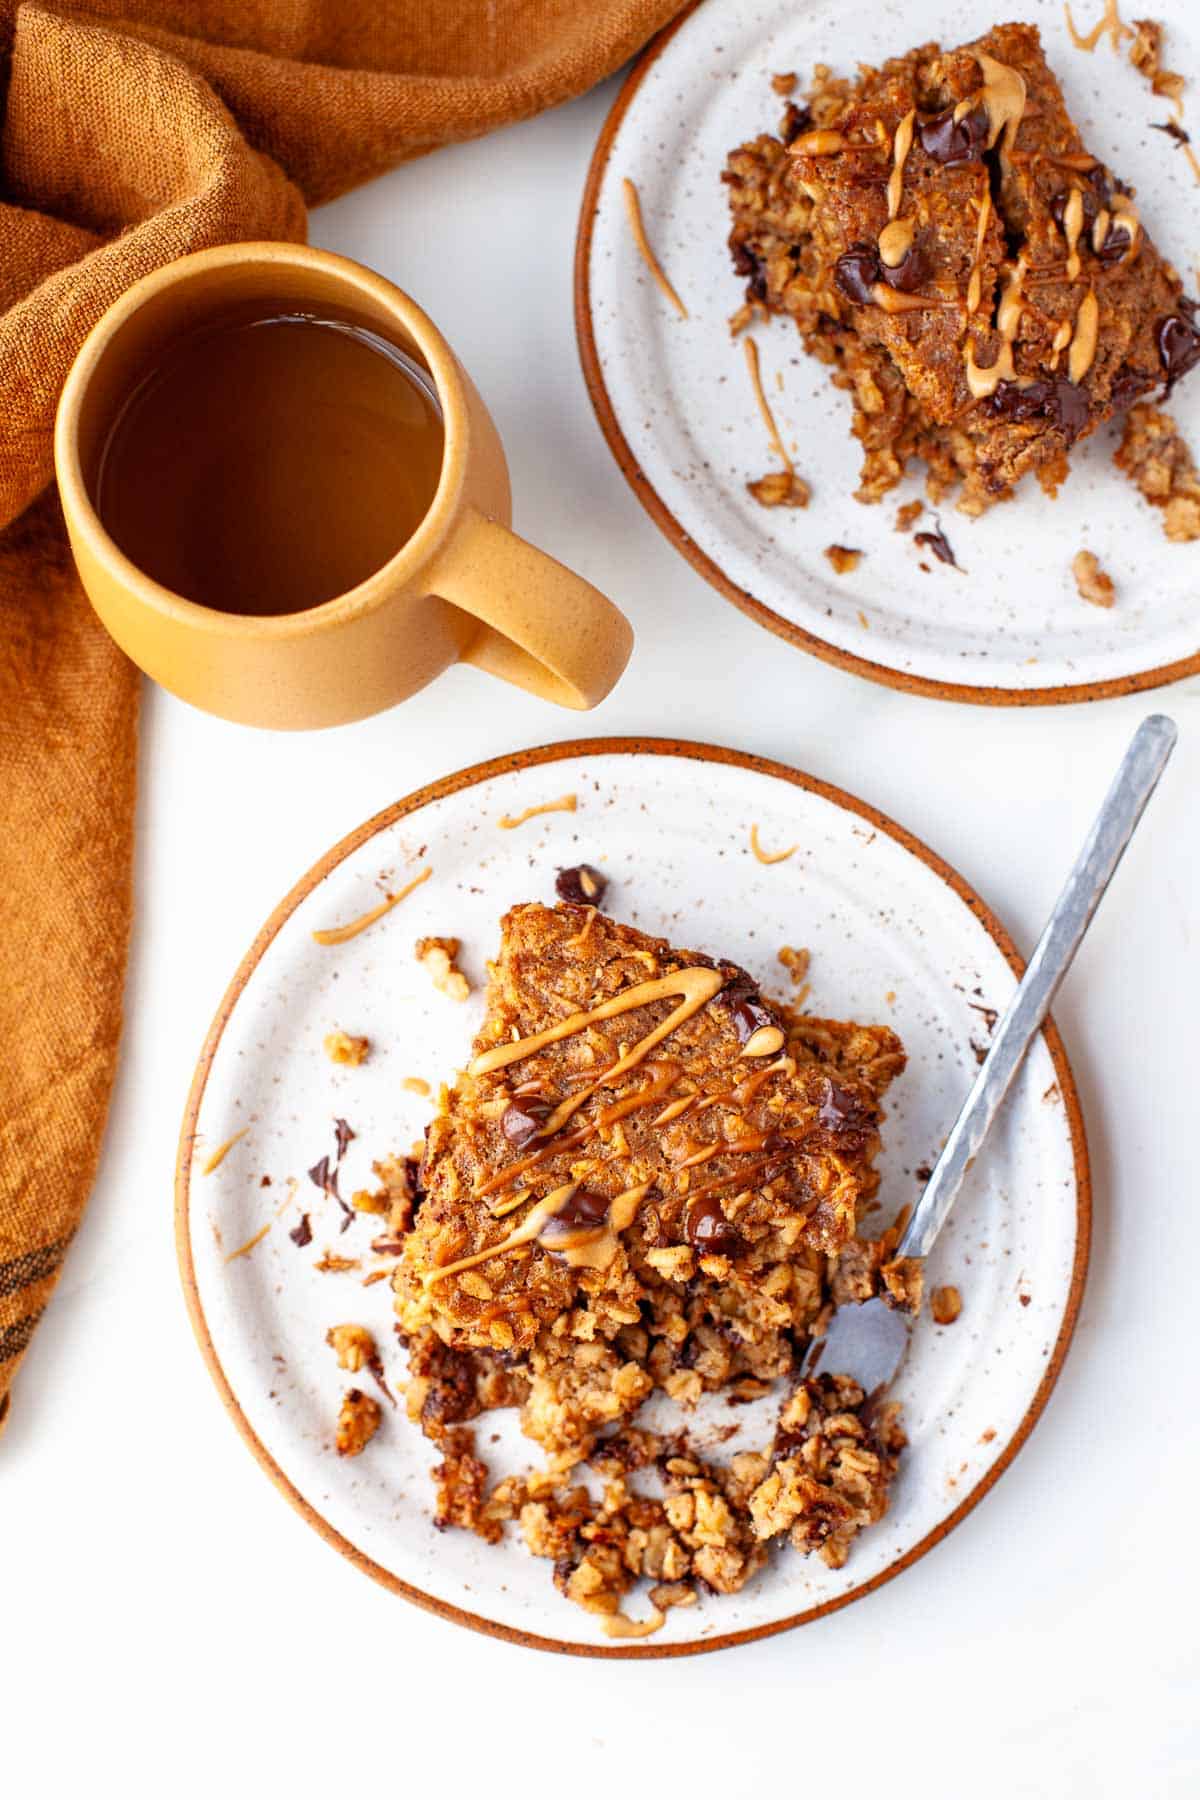 two white speckled plates with peanut butter baked oatmeal drizzled with peanut butter and topped with chocolate chips, beside orange coffee mug